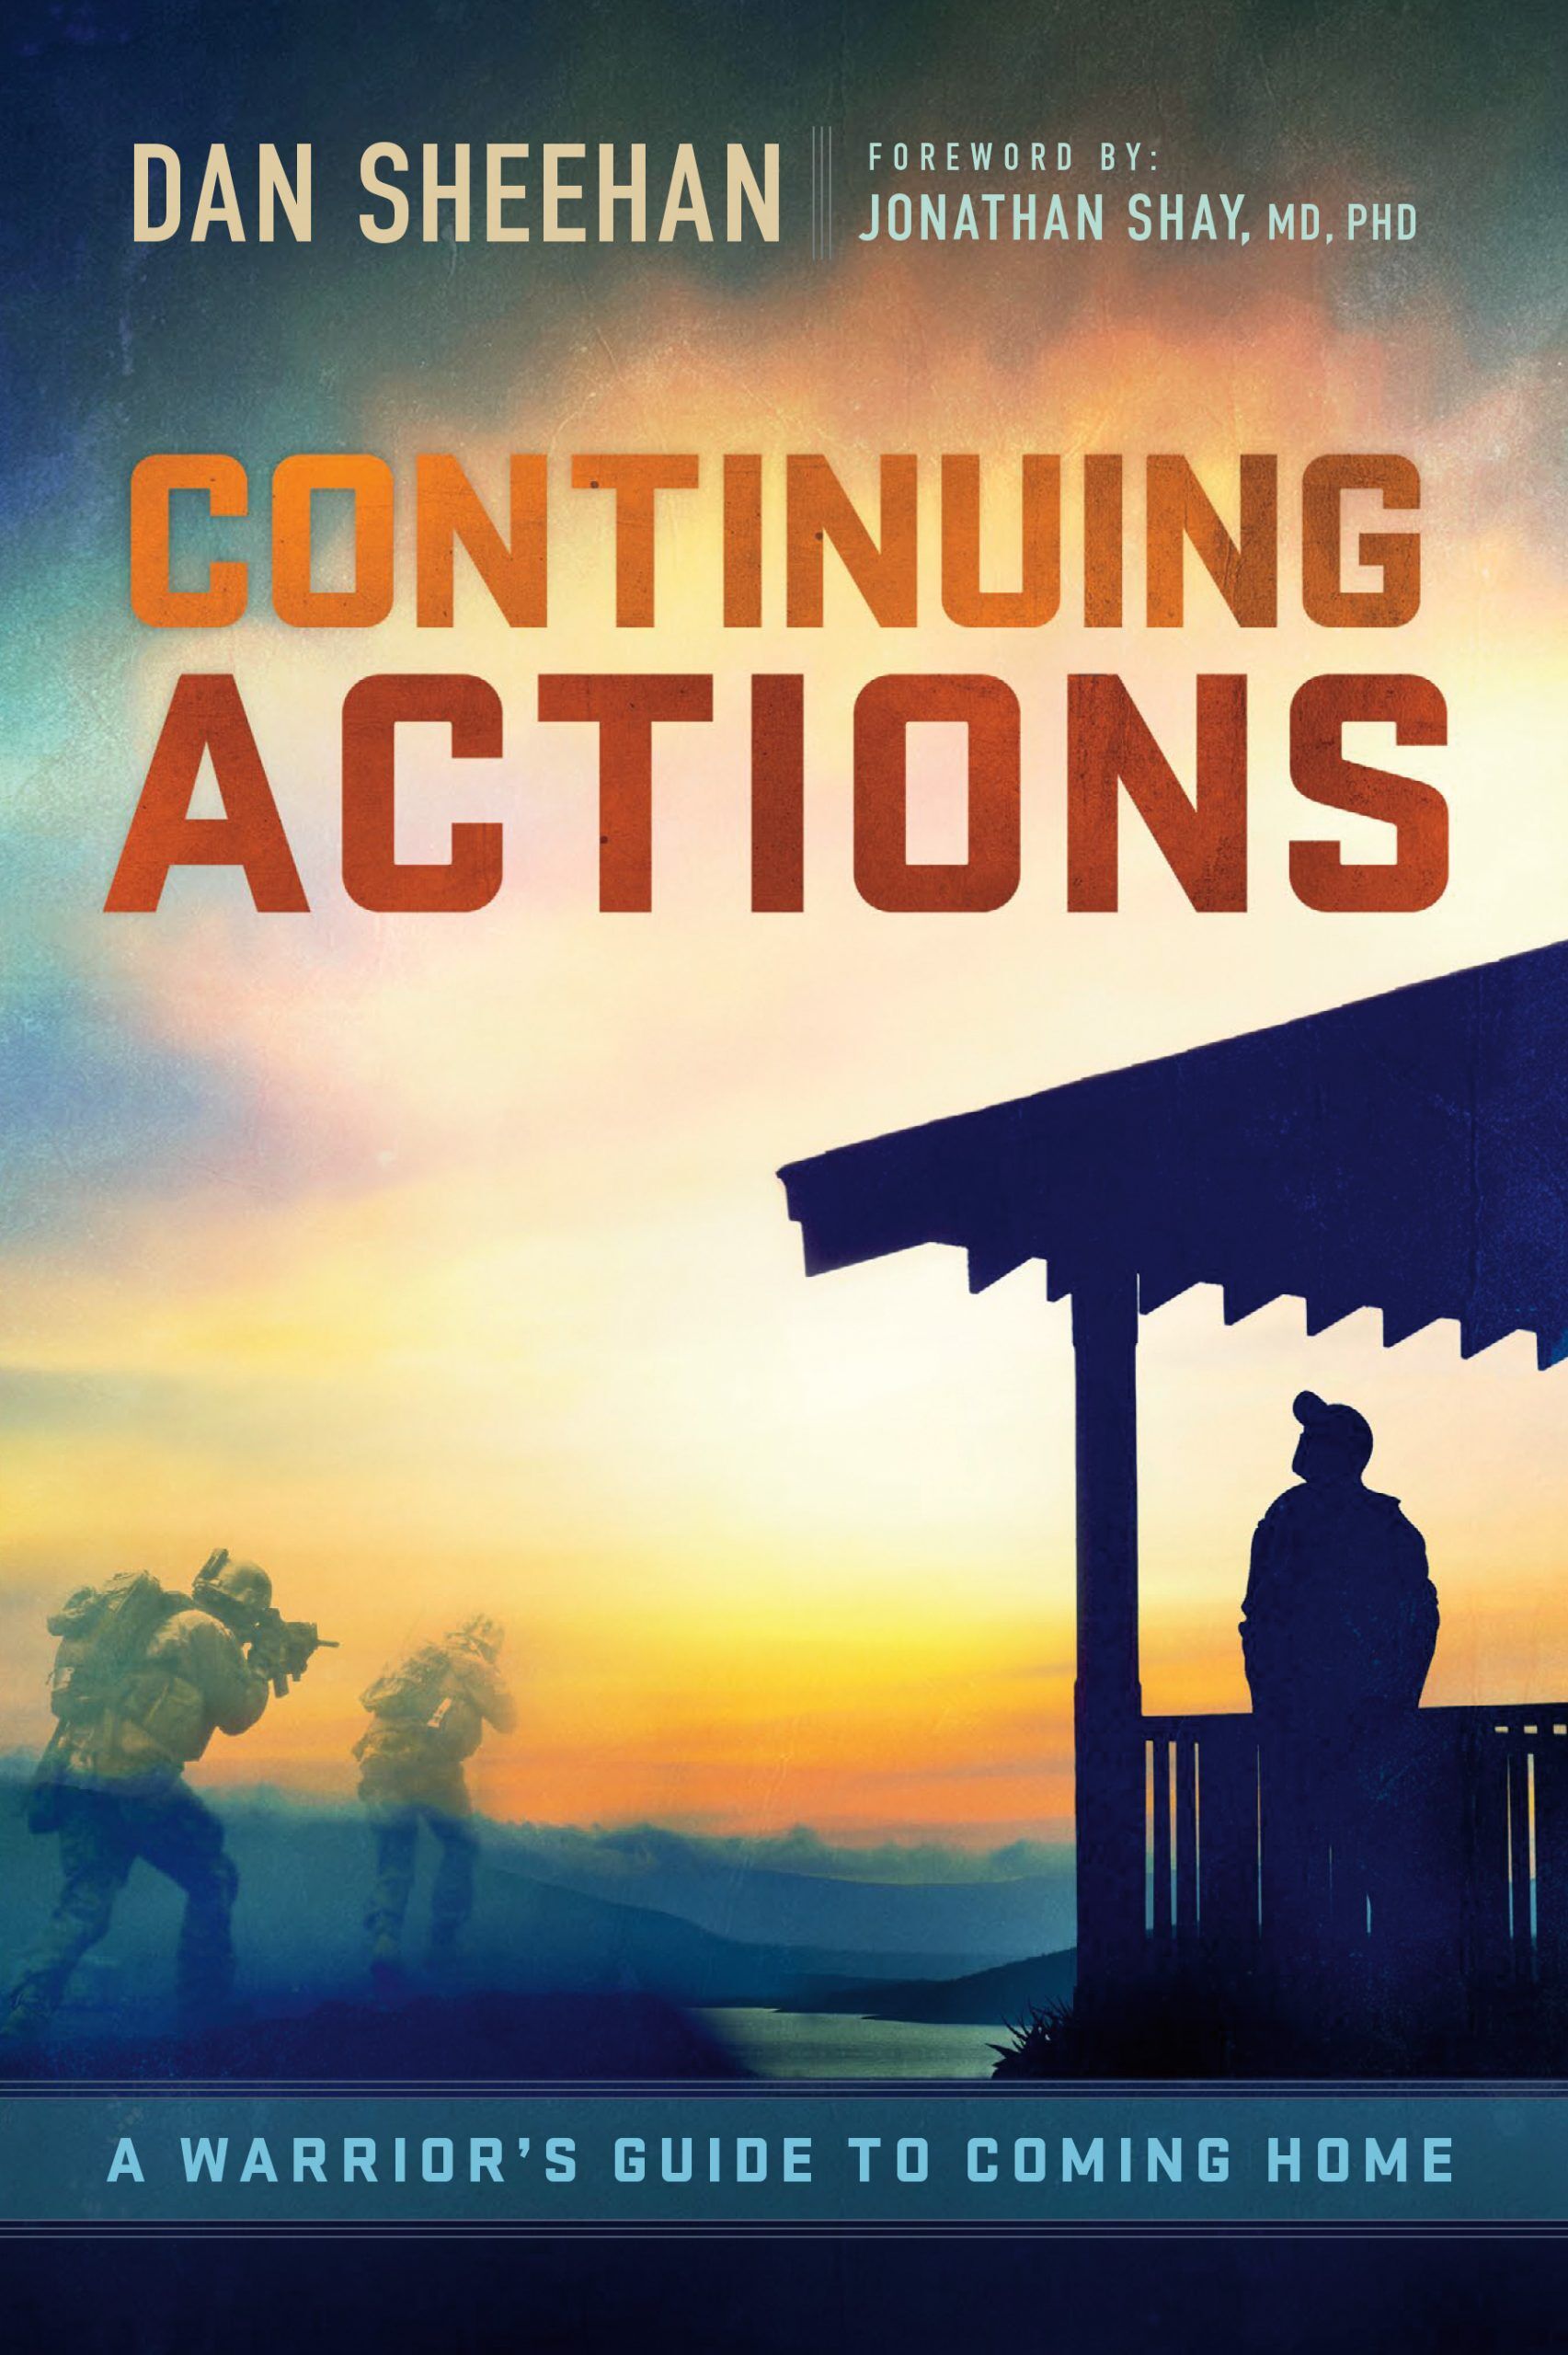 Continuing Actions: A Warrior's Guide to Coming Home